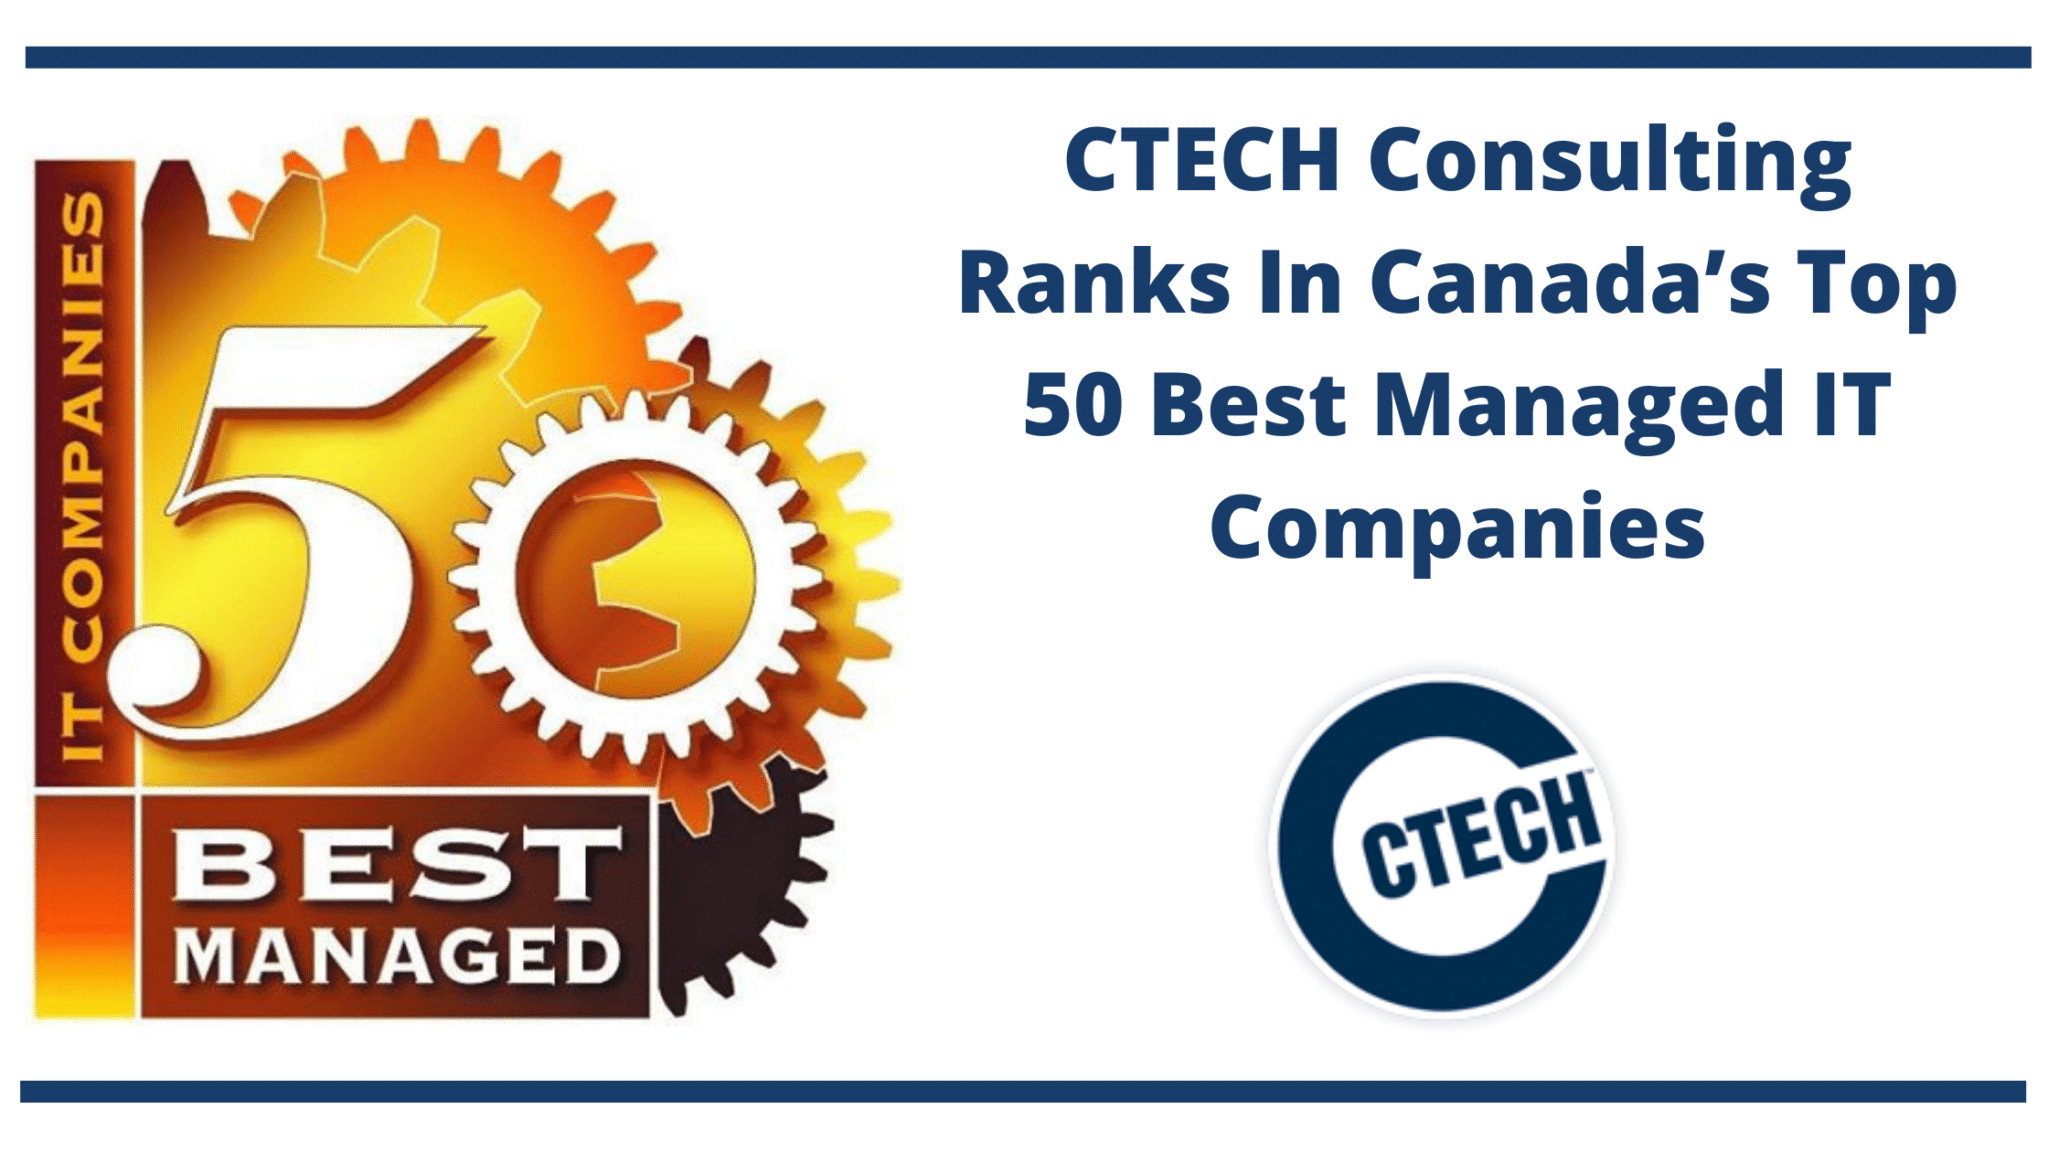 CTECH Consulting Ranks In Canada’s Top 50 Best Managed IT Companies